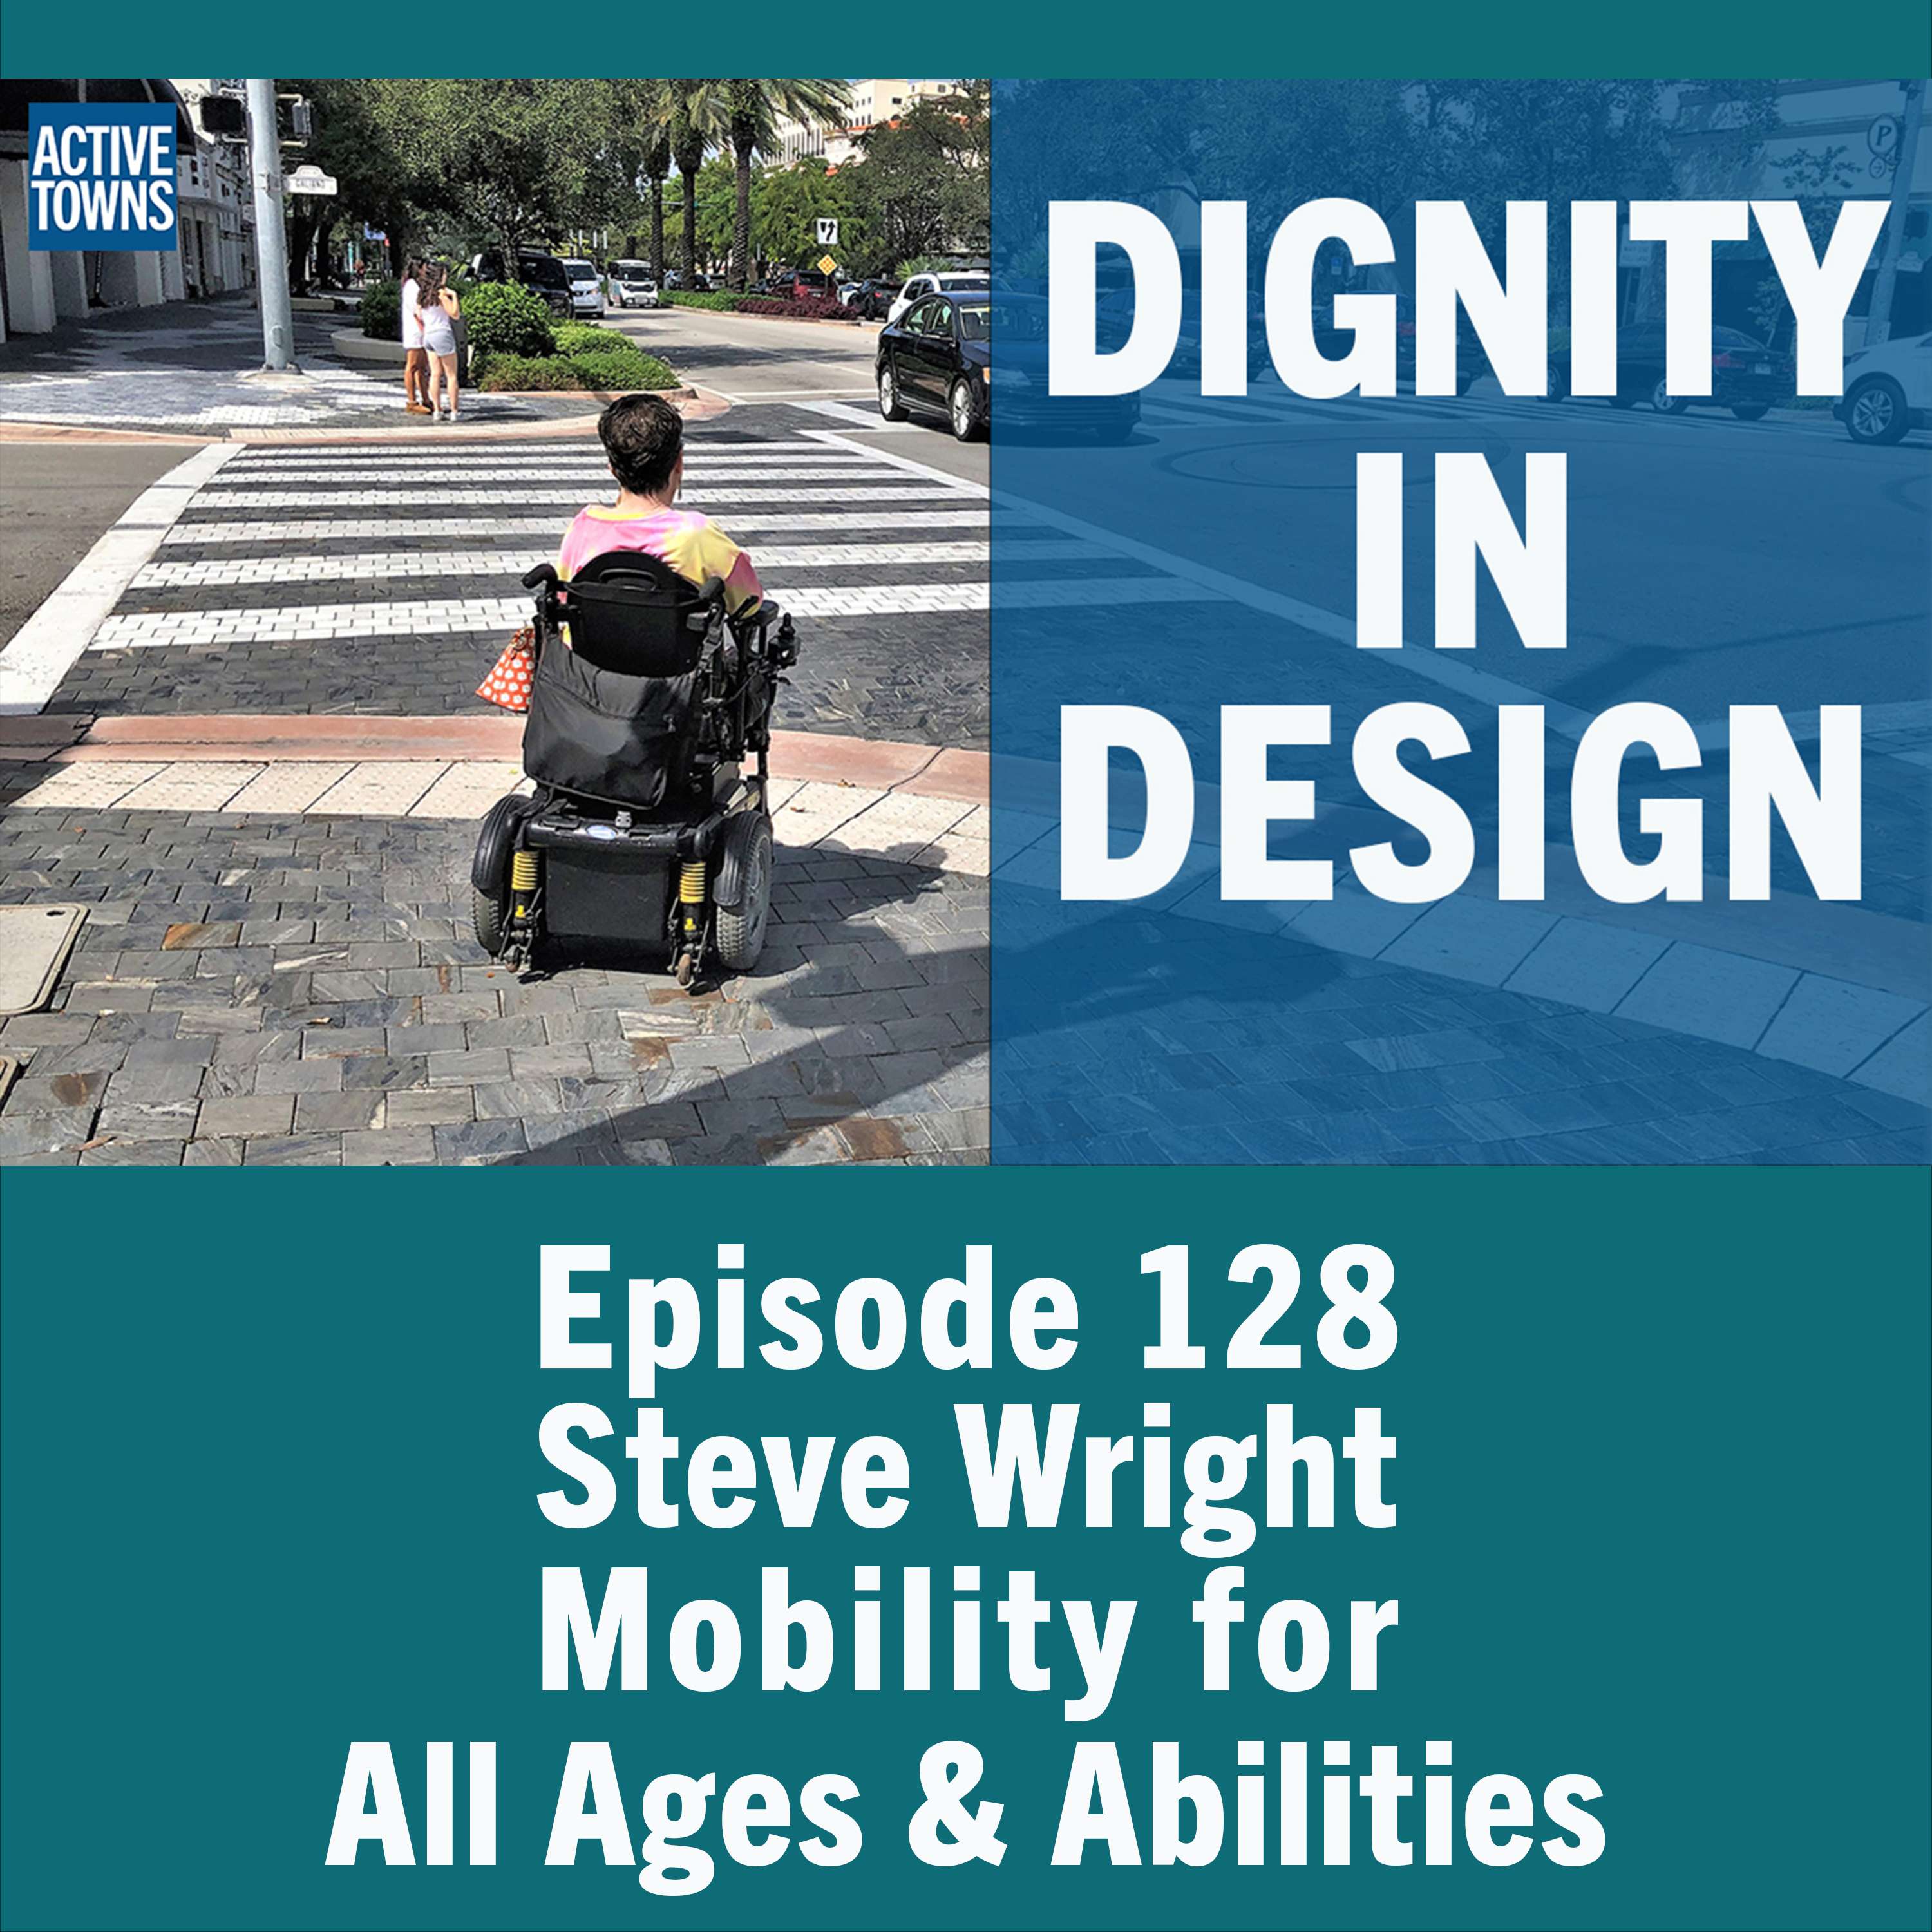 Dignity Design for All Ages & Abilities w/ Steve Wright (video available)